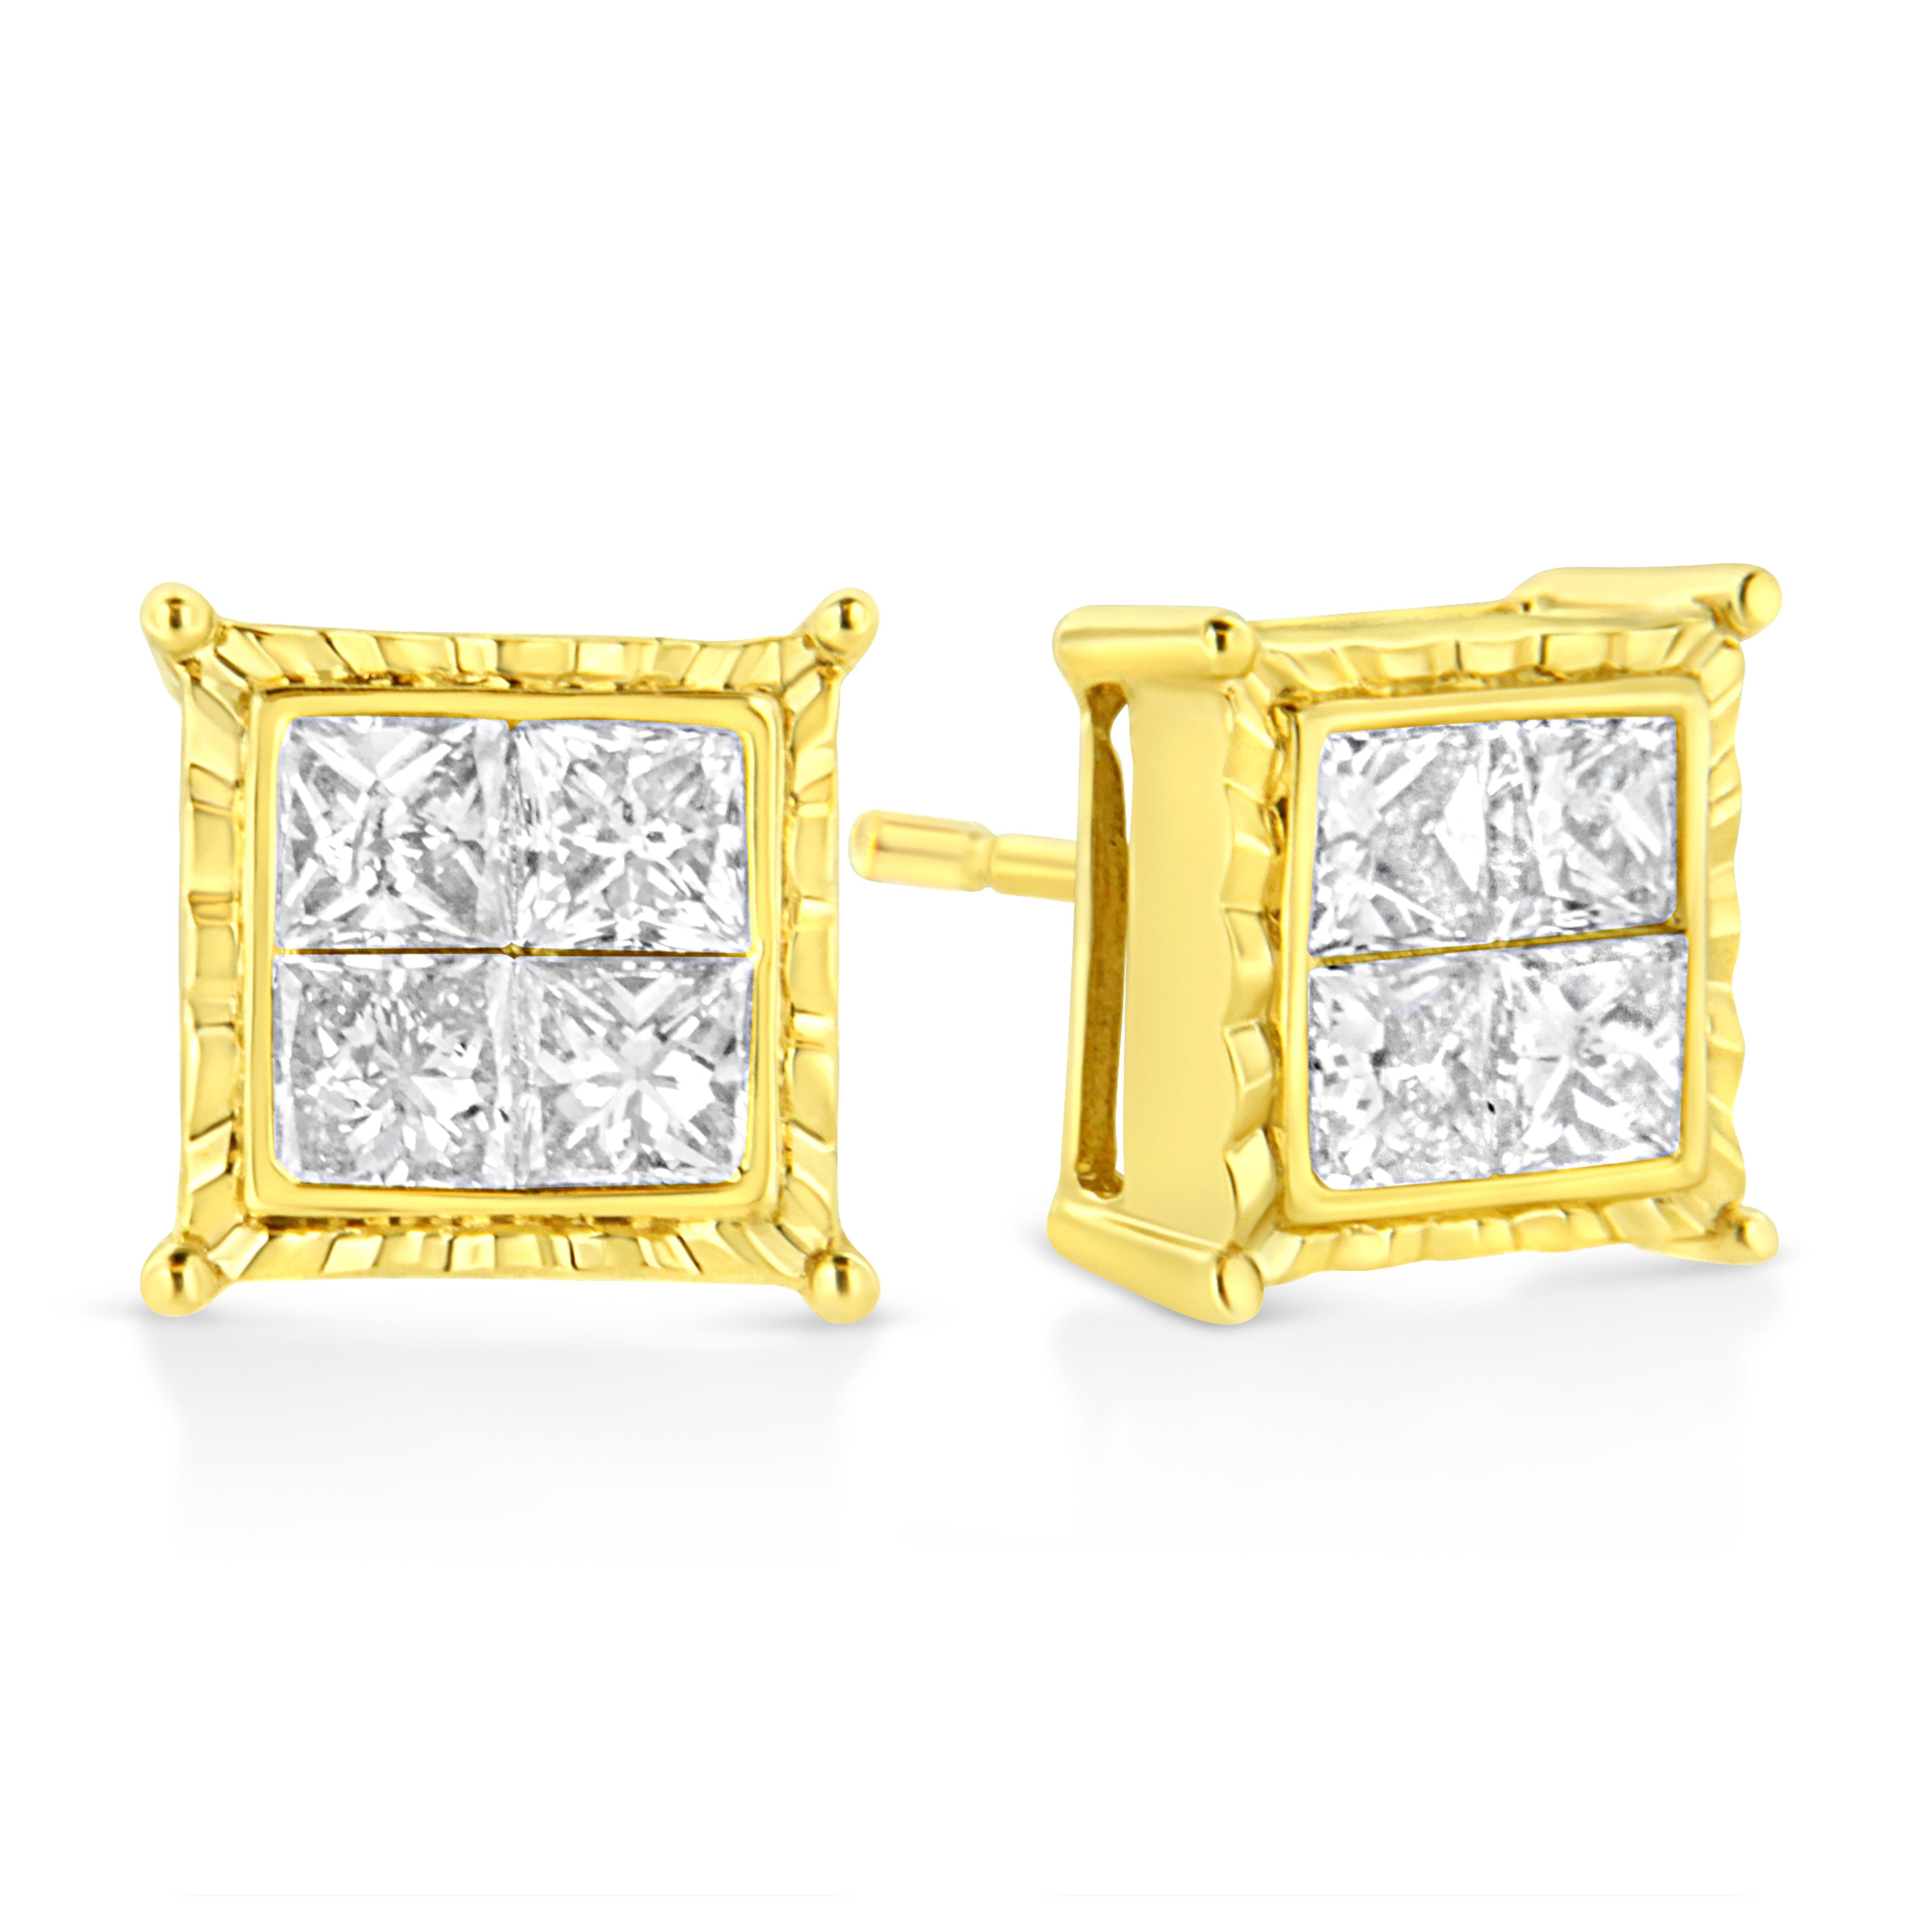 You will love these classic square stud earrings. A must have for any serious jewelry collection, these 14k yellow gold earrings boast an impressive 1 ½ carat total weight of sparkling diamonds. Each square stud is designed with 4 princess-cut